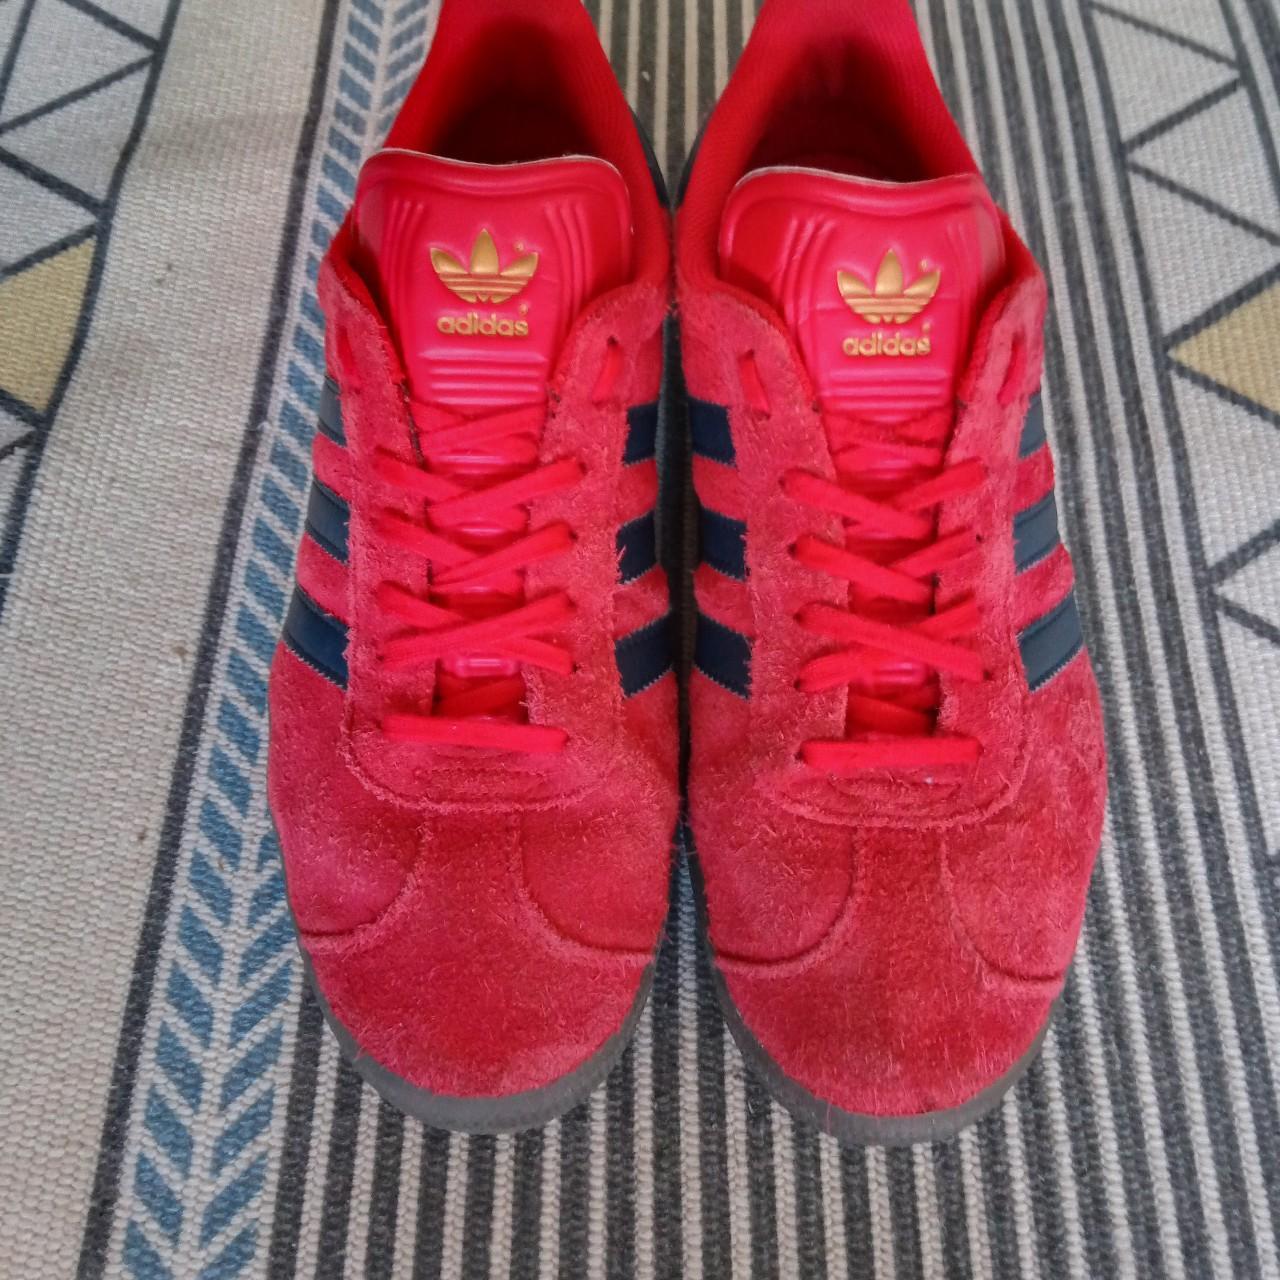 Adidas Gazelle 9 Red/Navy Blue These shoes have a... - Depop